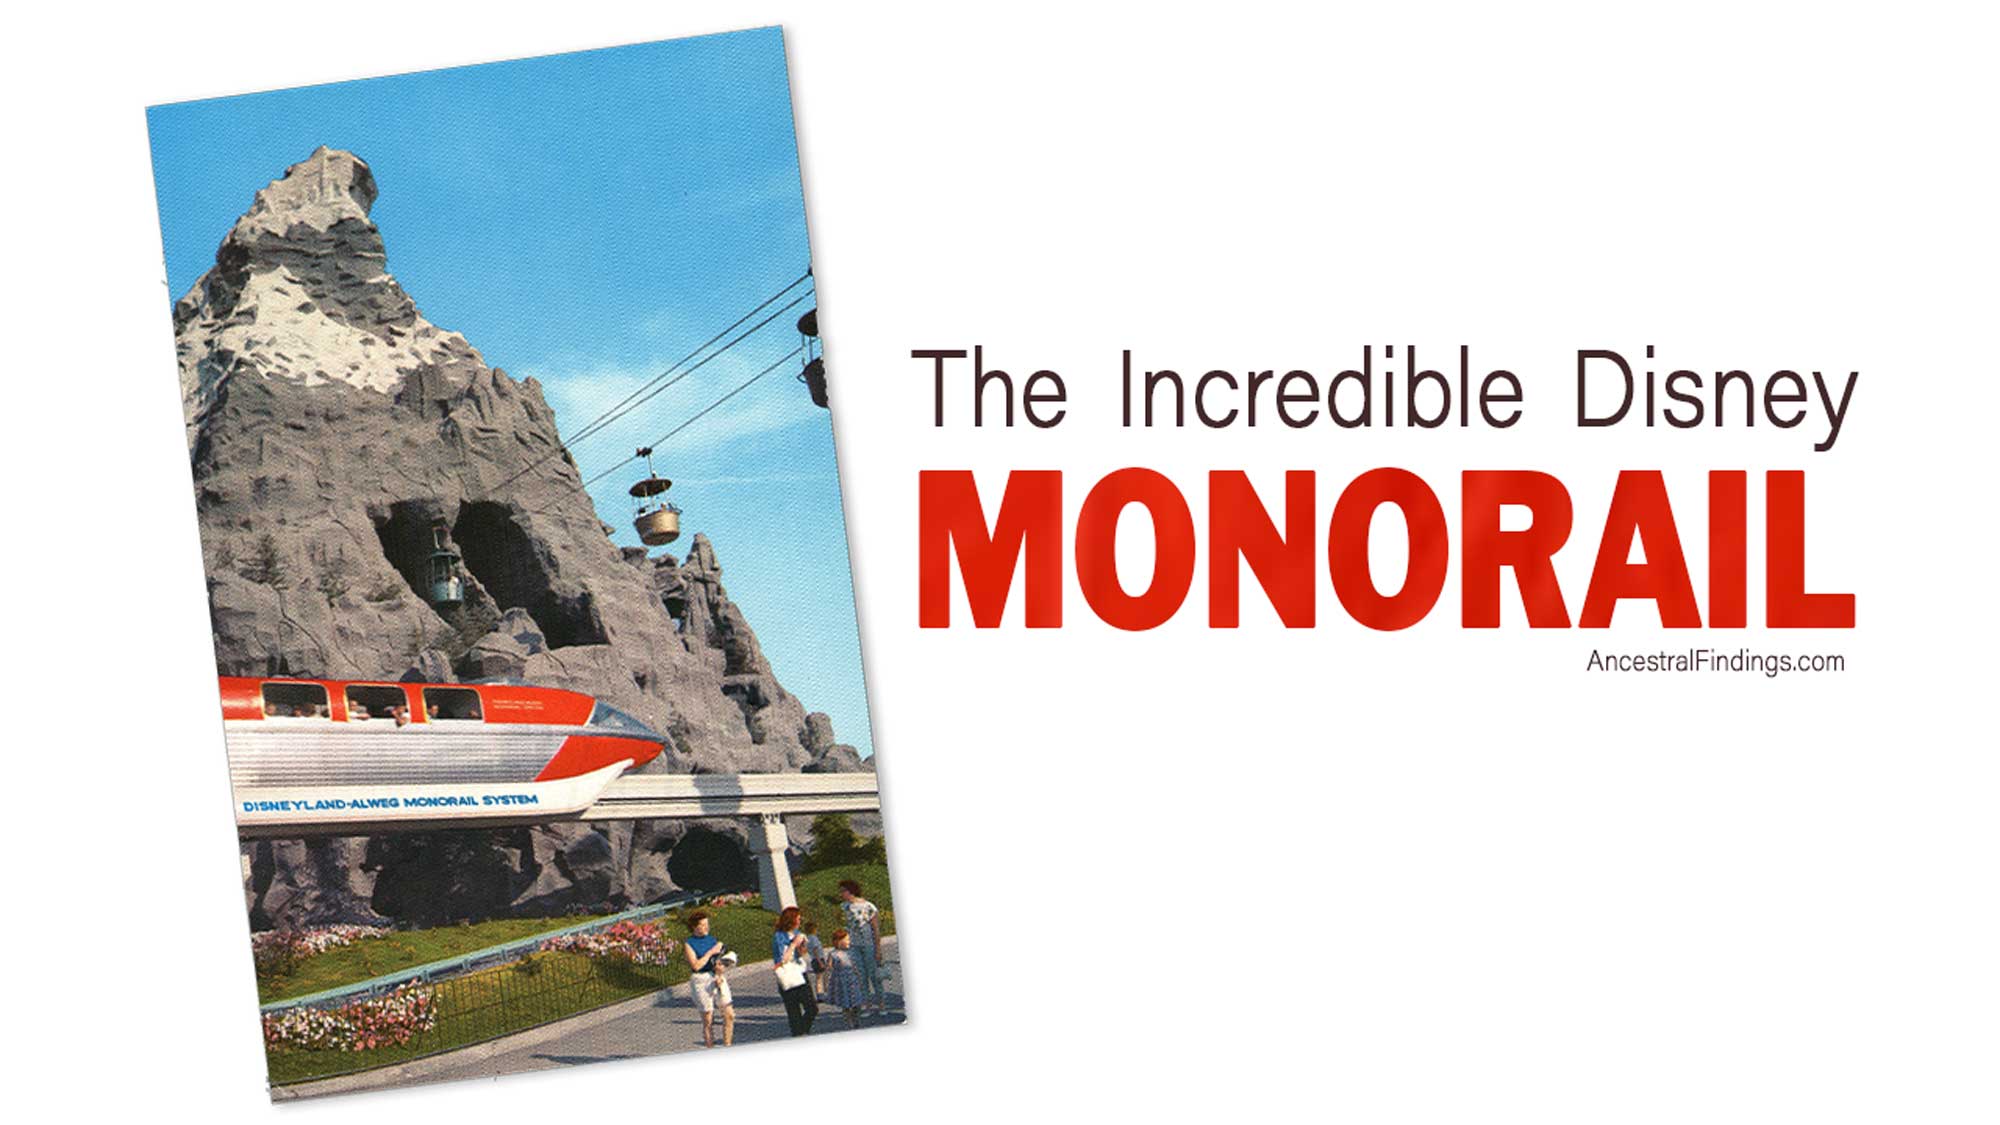 The Incredible Disney Monorail